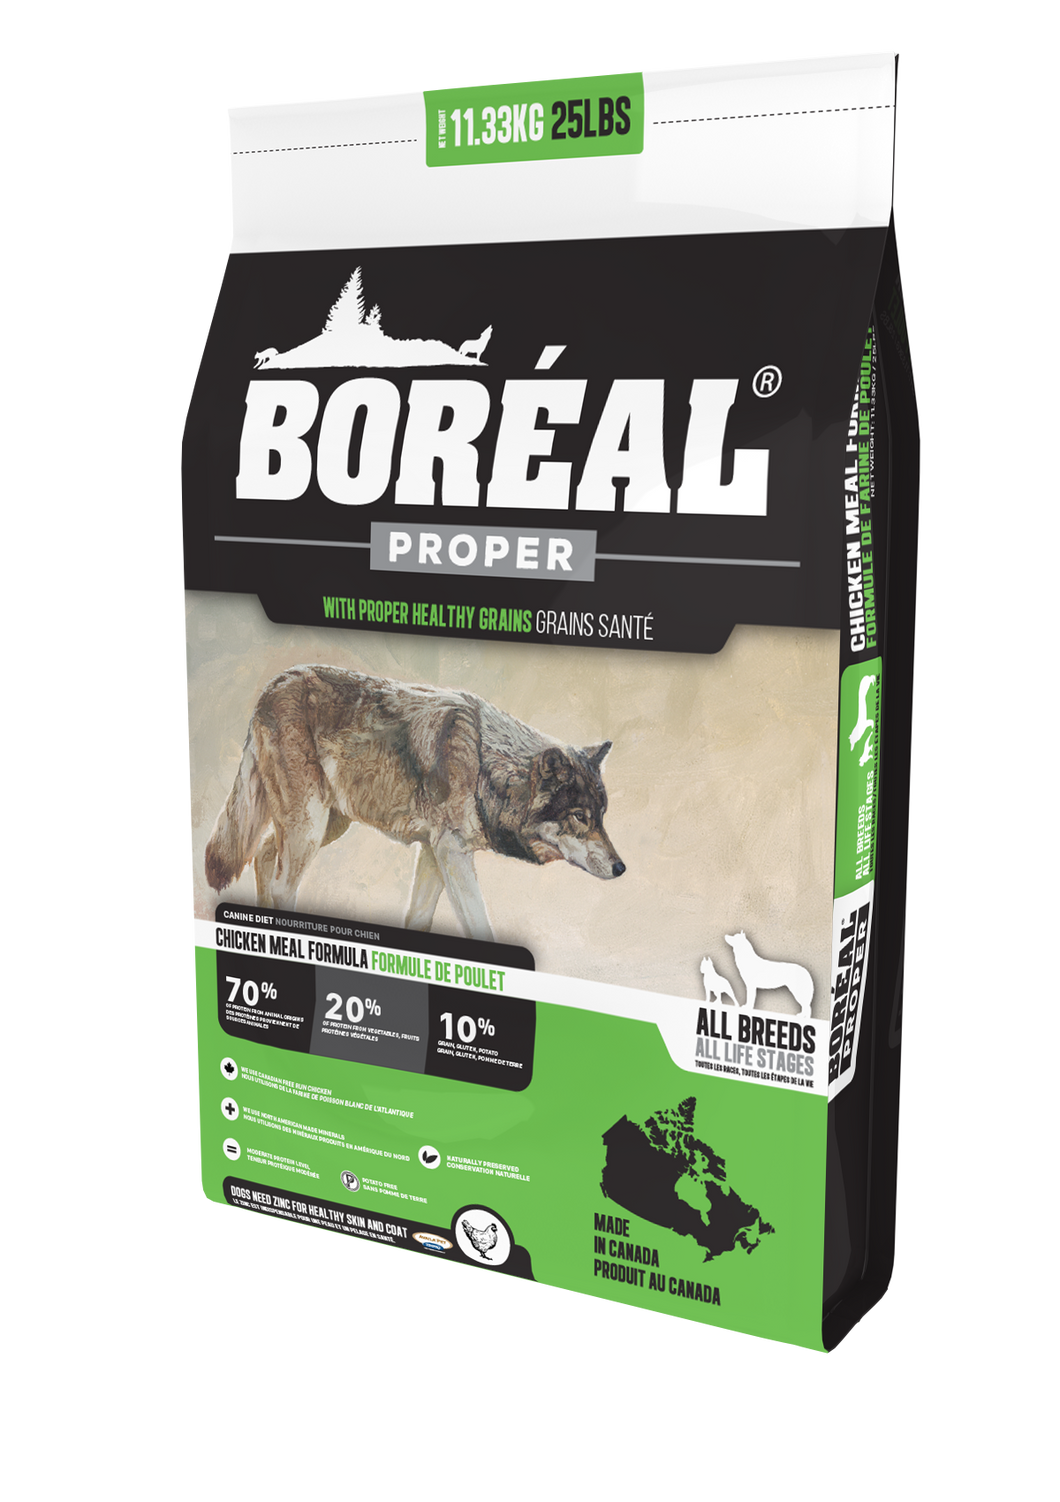 Boréal - Proper CHicken Meal Low Carb Grain Inclusive Dog Food - Low Glycemic Index - All Breed - Canadian Chicken - Free Run Ontario & Quebec Chicken - North American Minerals - Naturally Preserved - Potato Free - Single Source Chicken - Single Protein - Made in Canada